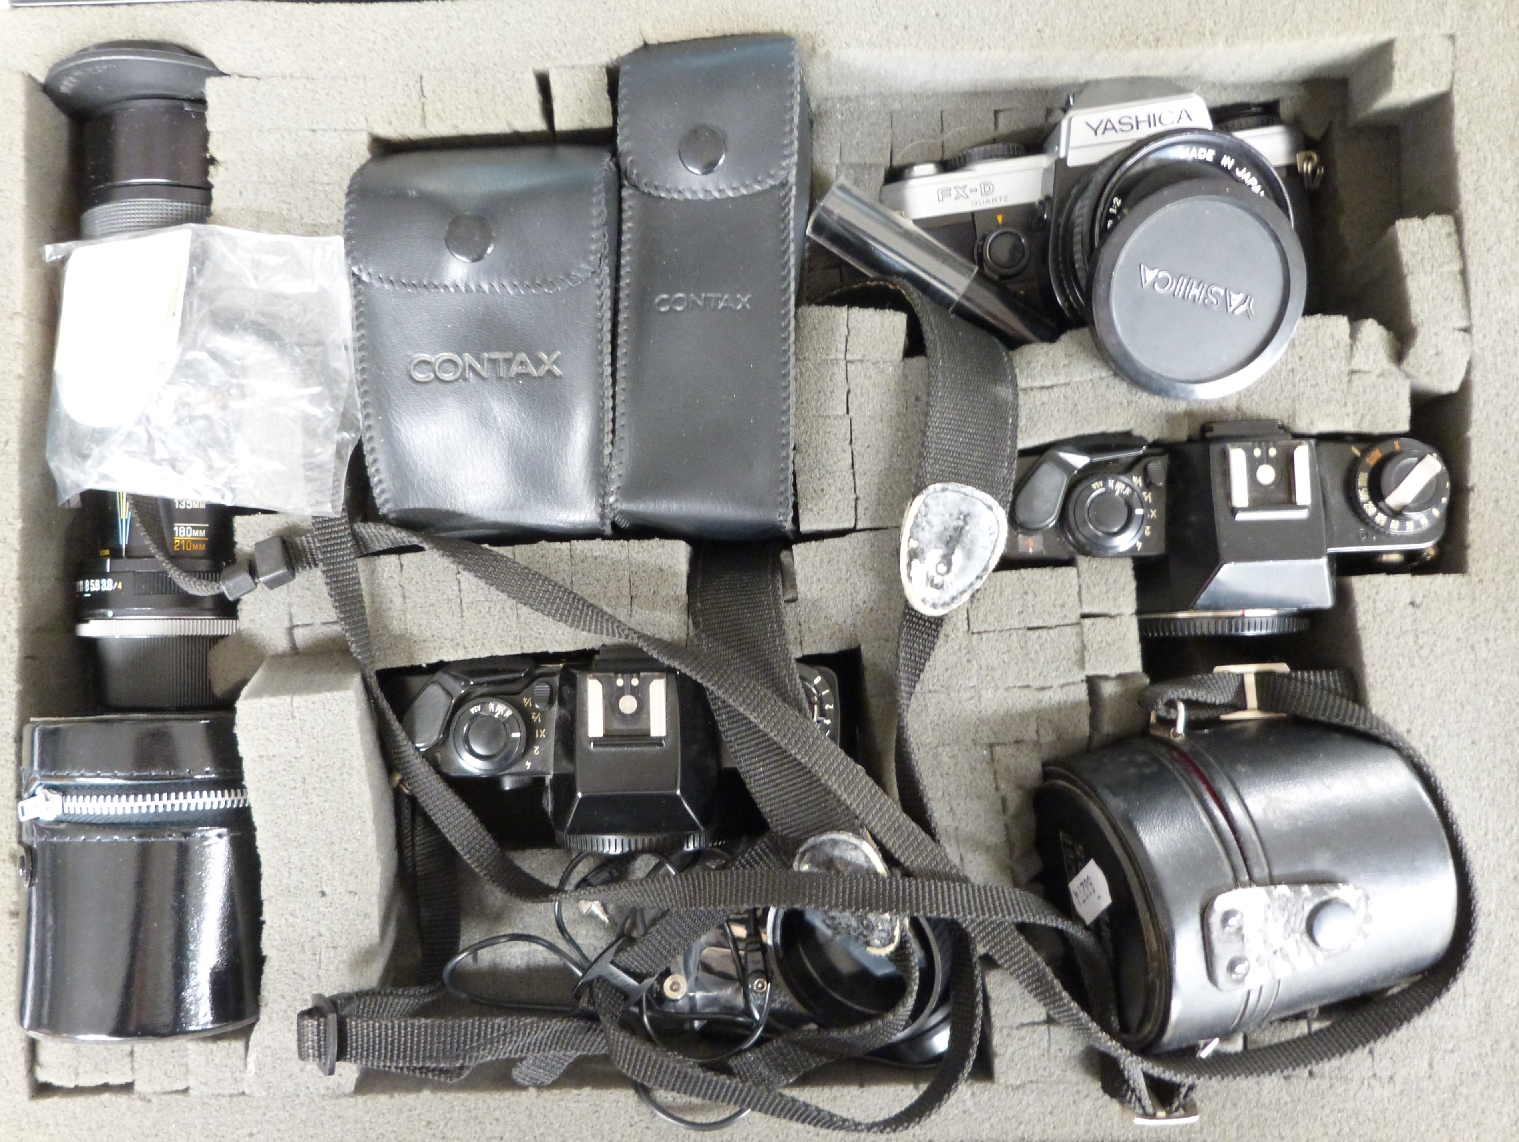 Contax and Yashica cameras, lenses and accessories to include two Contax 139 Quartz SLR bodies, - Image 3 of 3